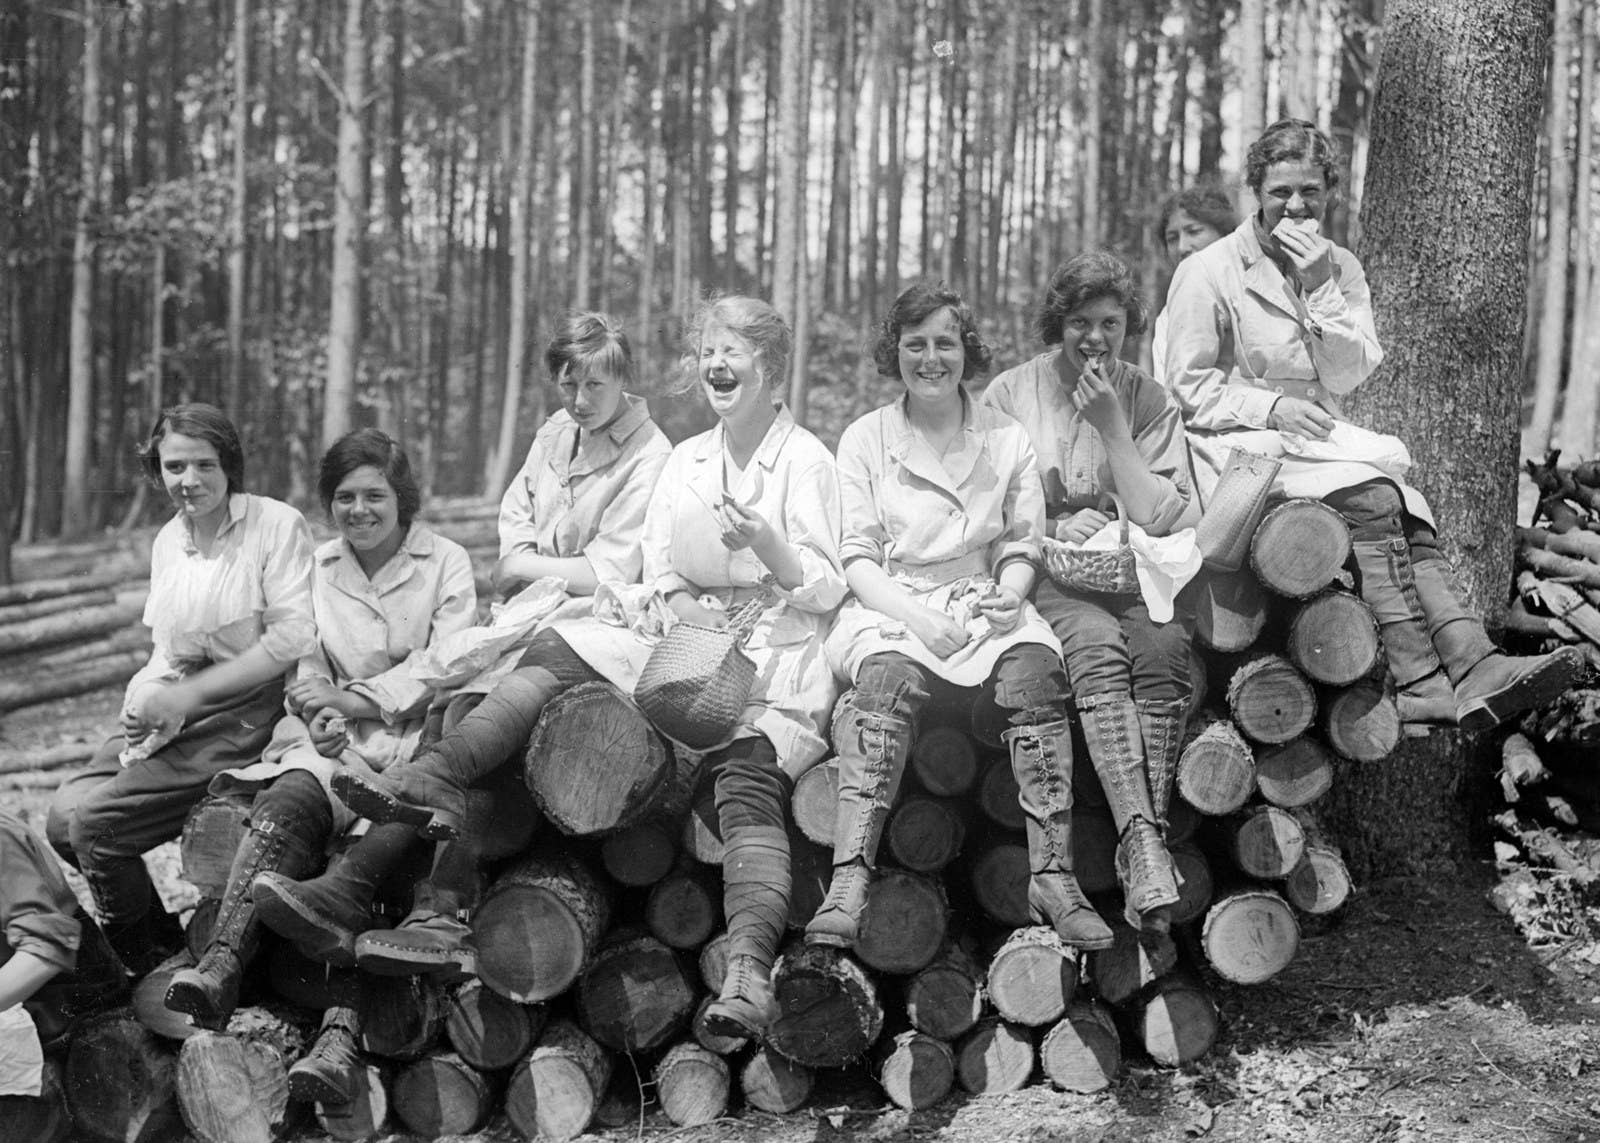 Women forestry workers sit on a pile of logs enjoying their lunches, 1918.